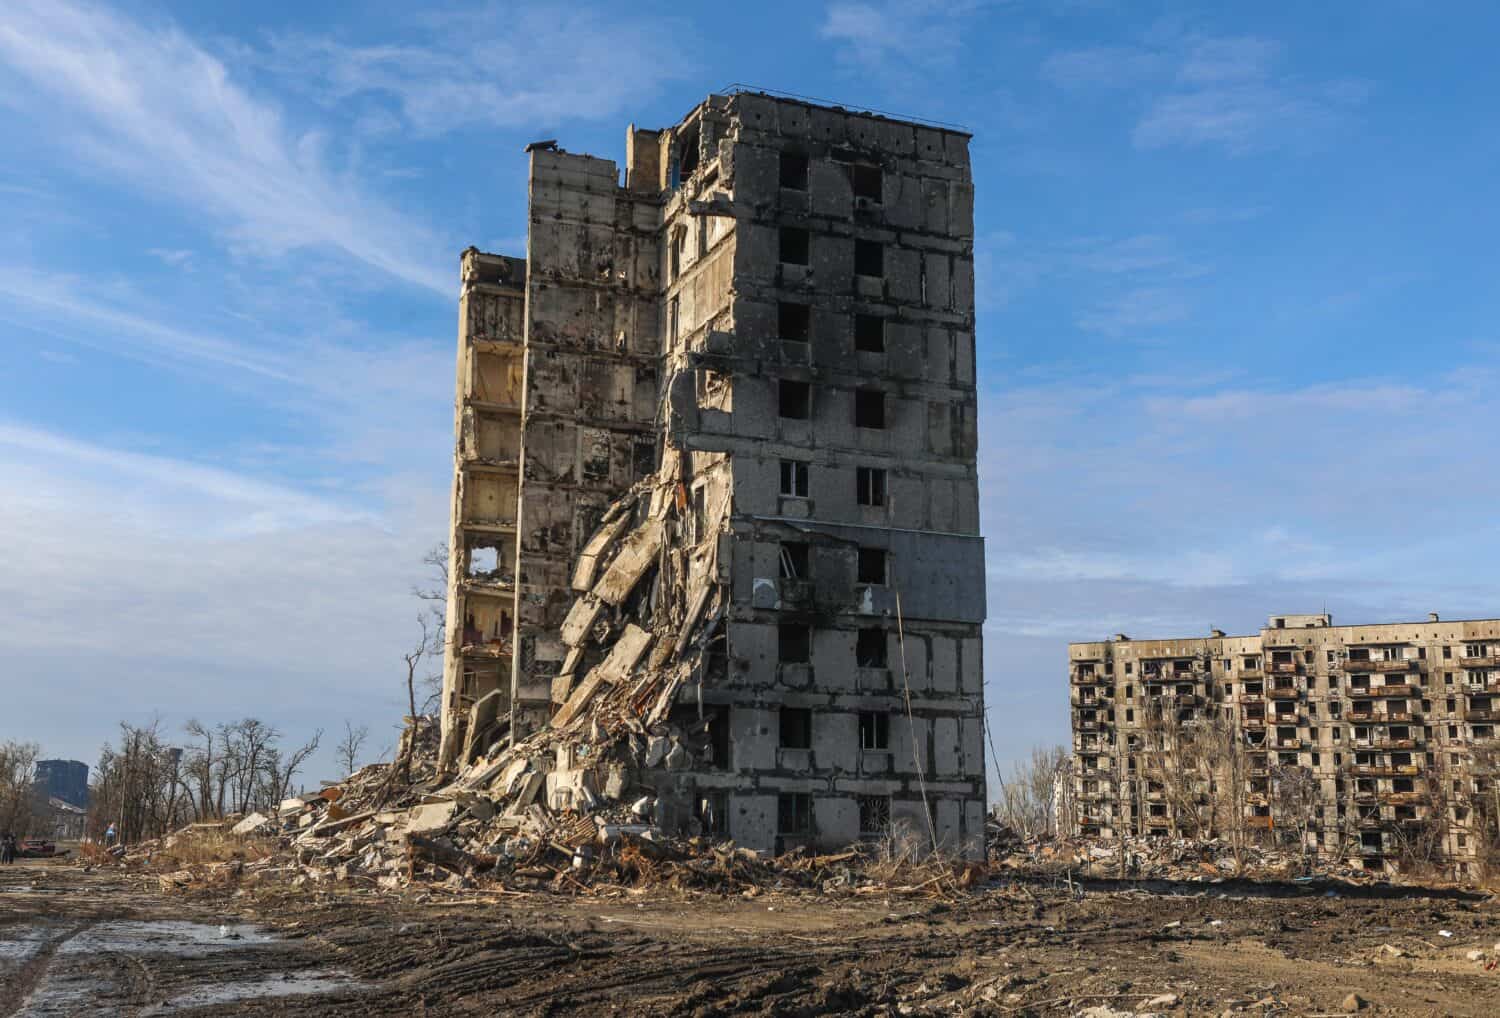 A residential building was destroyed by an explosion as a result of Russia's war against Ukraine. A residential building damaged burned down from the consequences of the fighting in Mariupol.